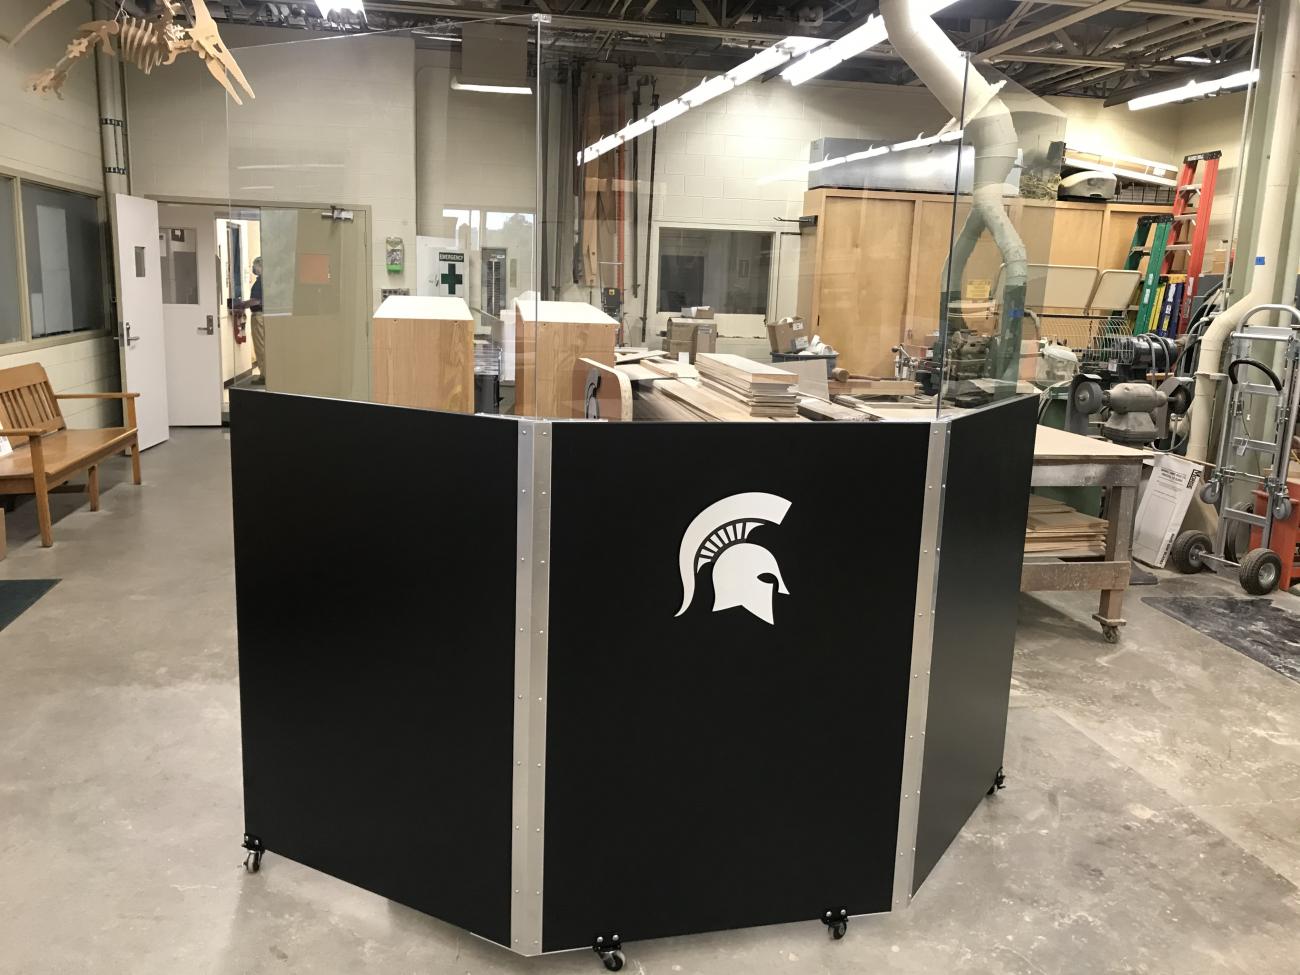 One of six mobile conductor's shields fabricated for the College of Music by IPF Alterations and Improvements and Carpentry Shop craftsmen.